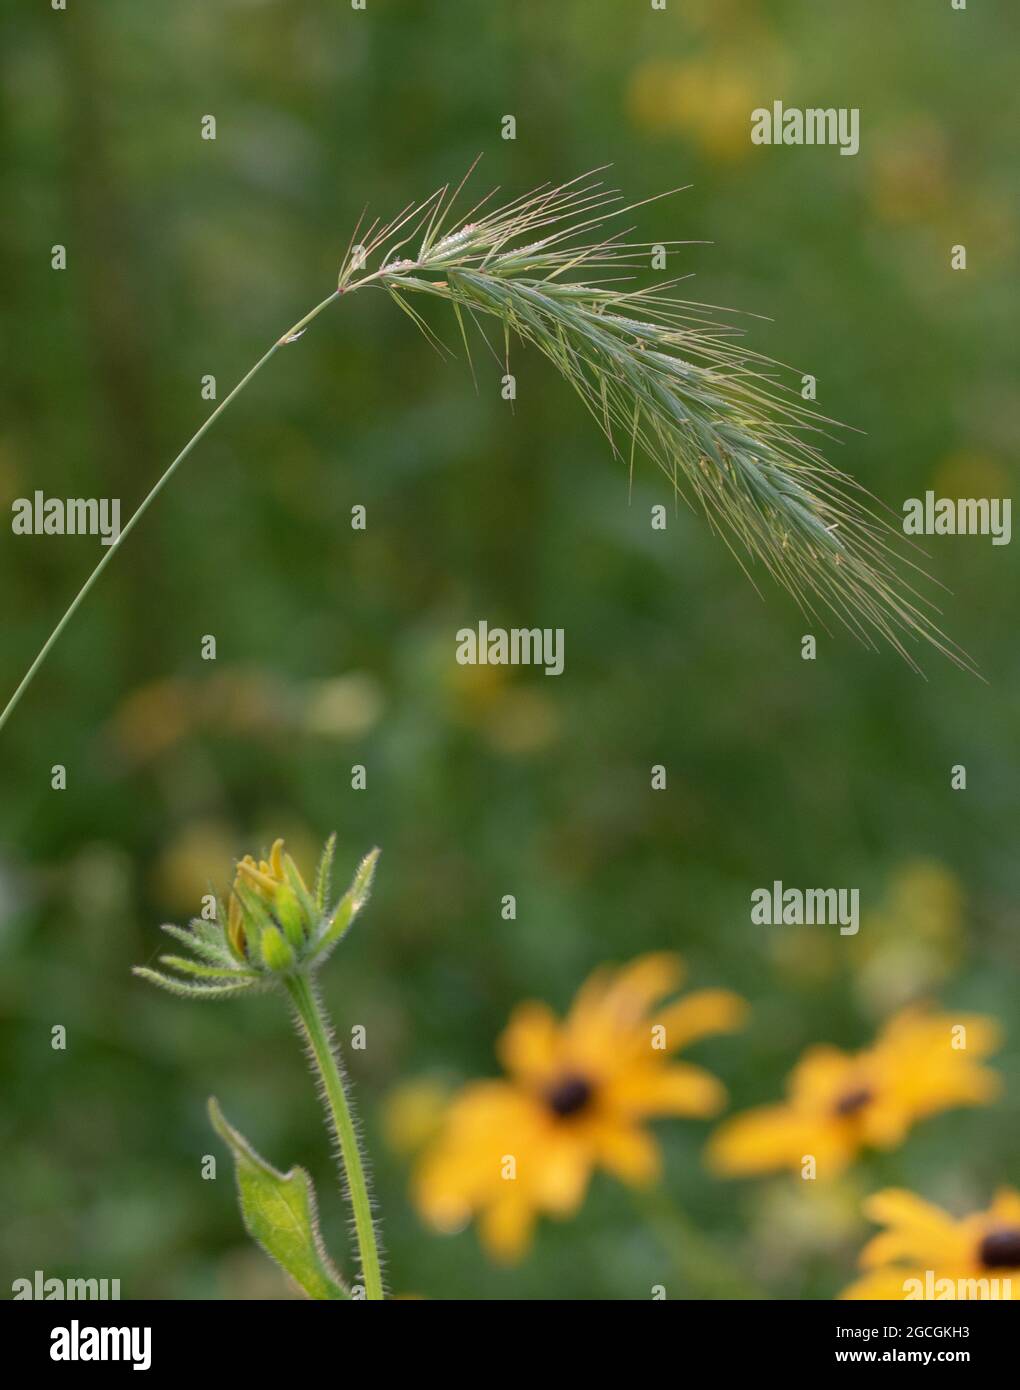 A Sedge plant curved over Black-eyed Susan wildflowers Stock Photo